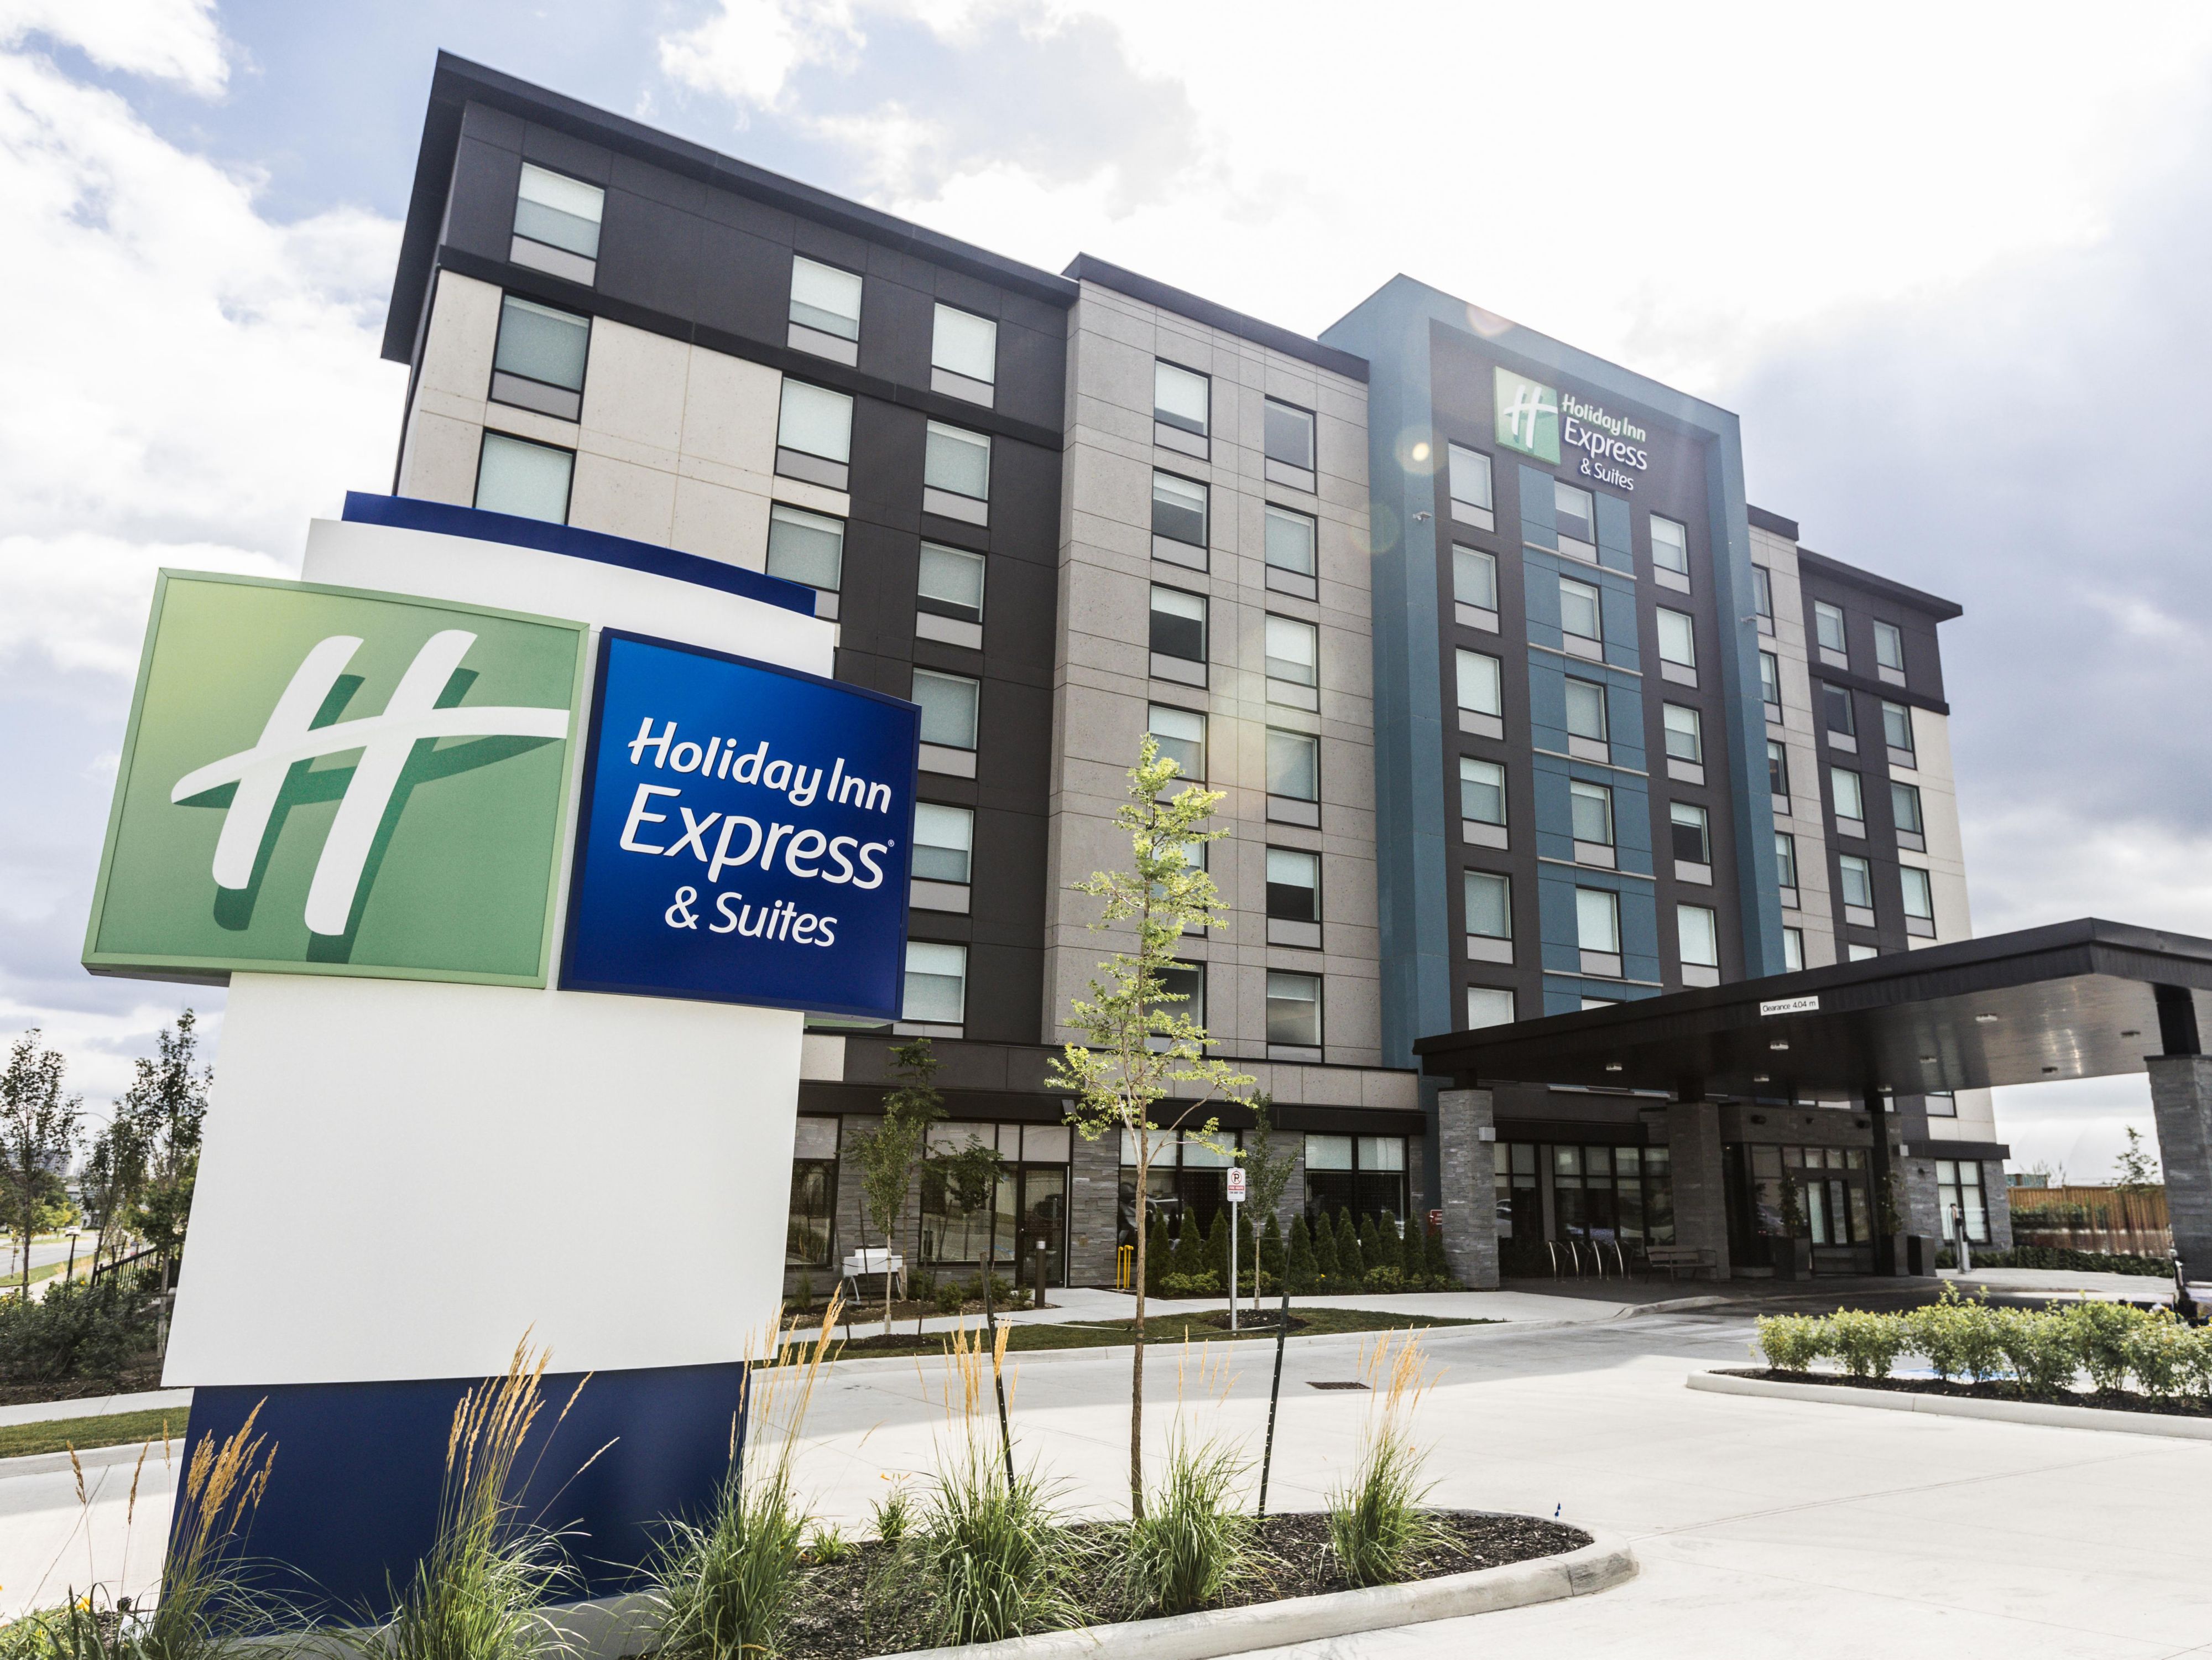 Holiday Inn Express And Suites Toronto 9301721488 4x3